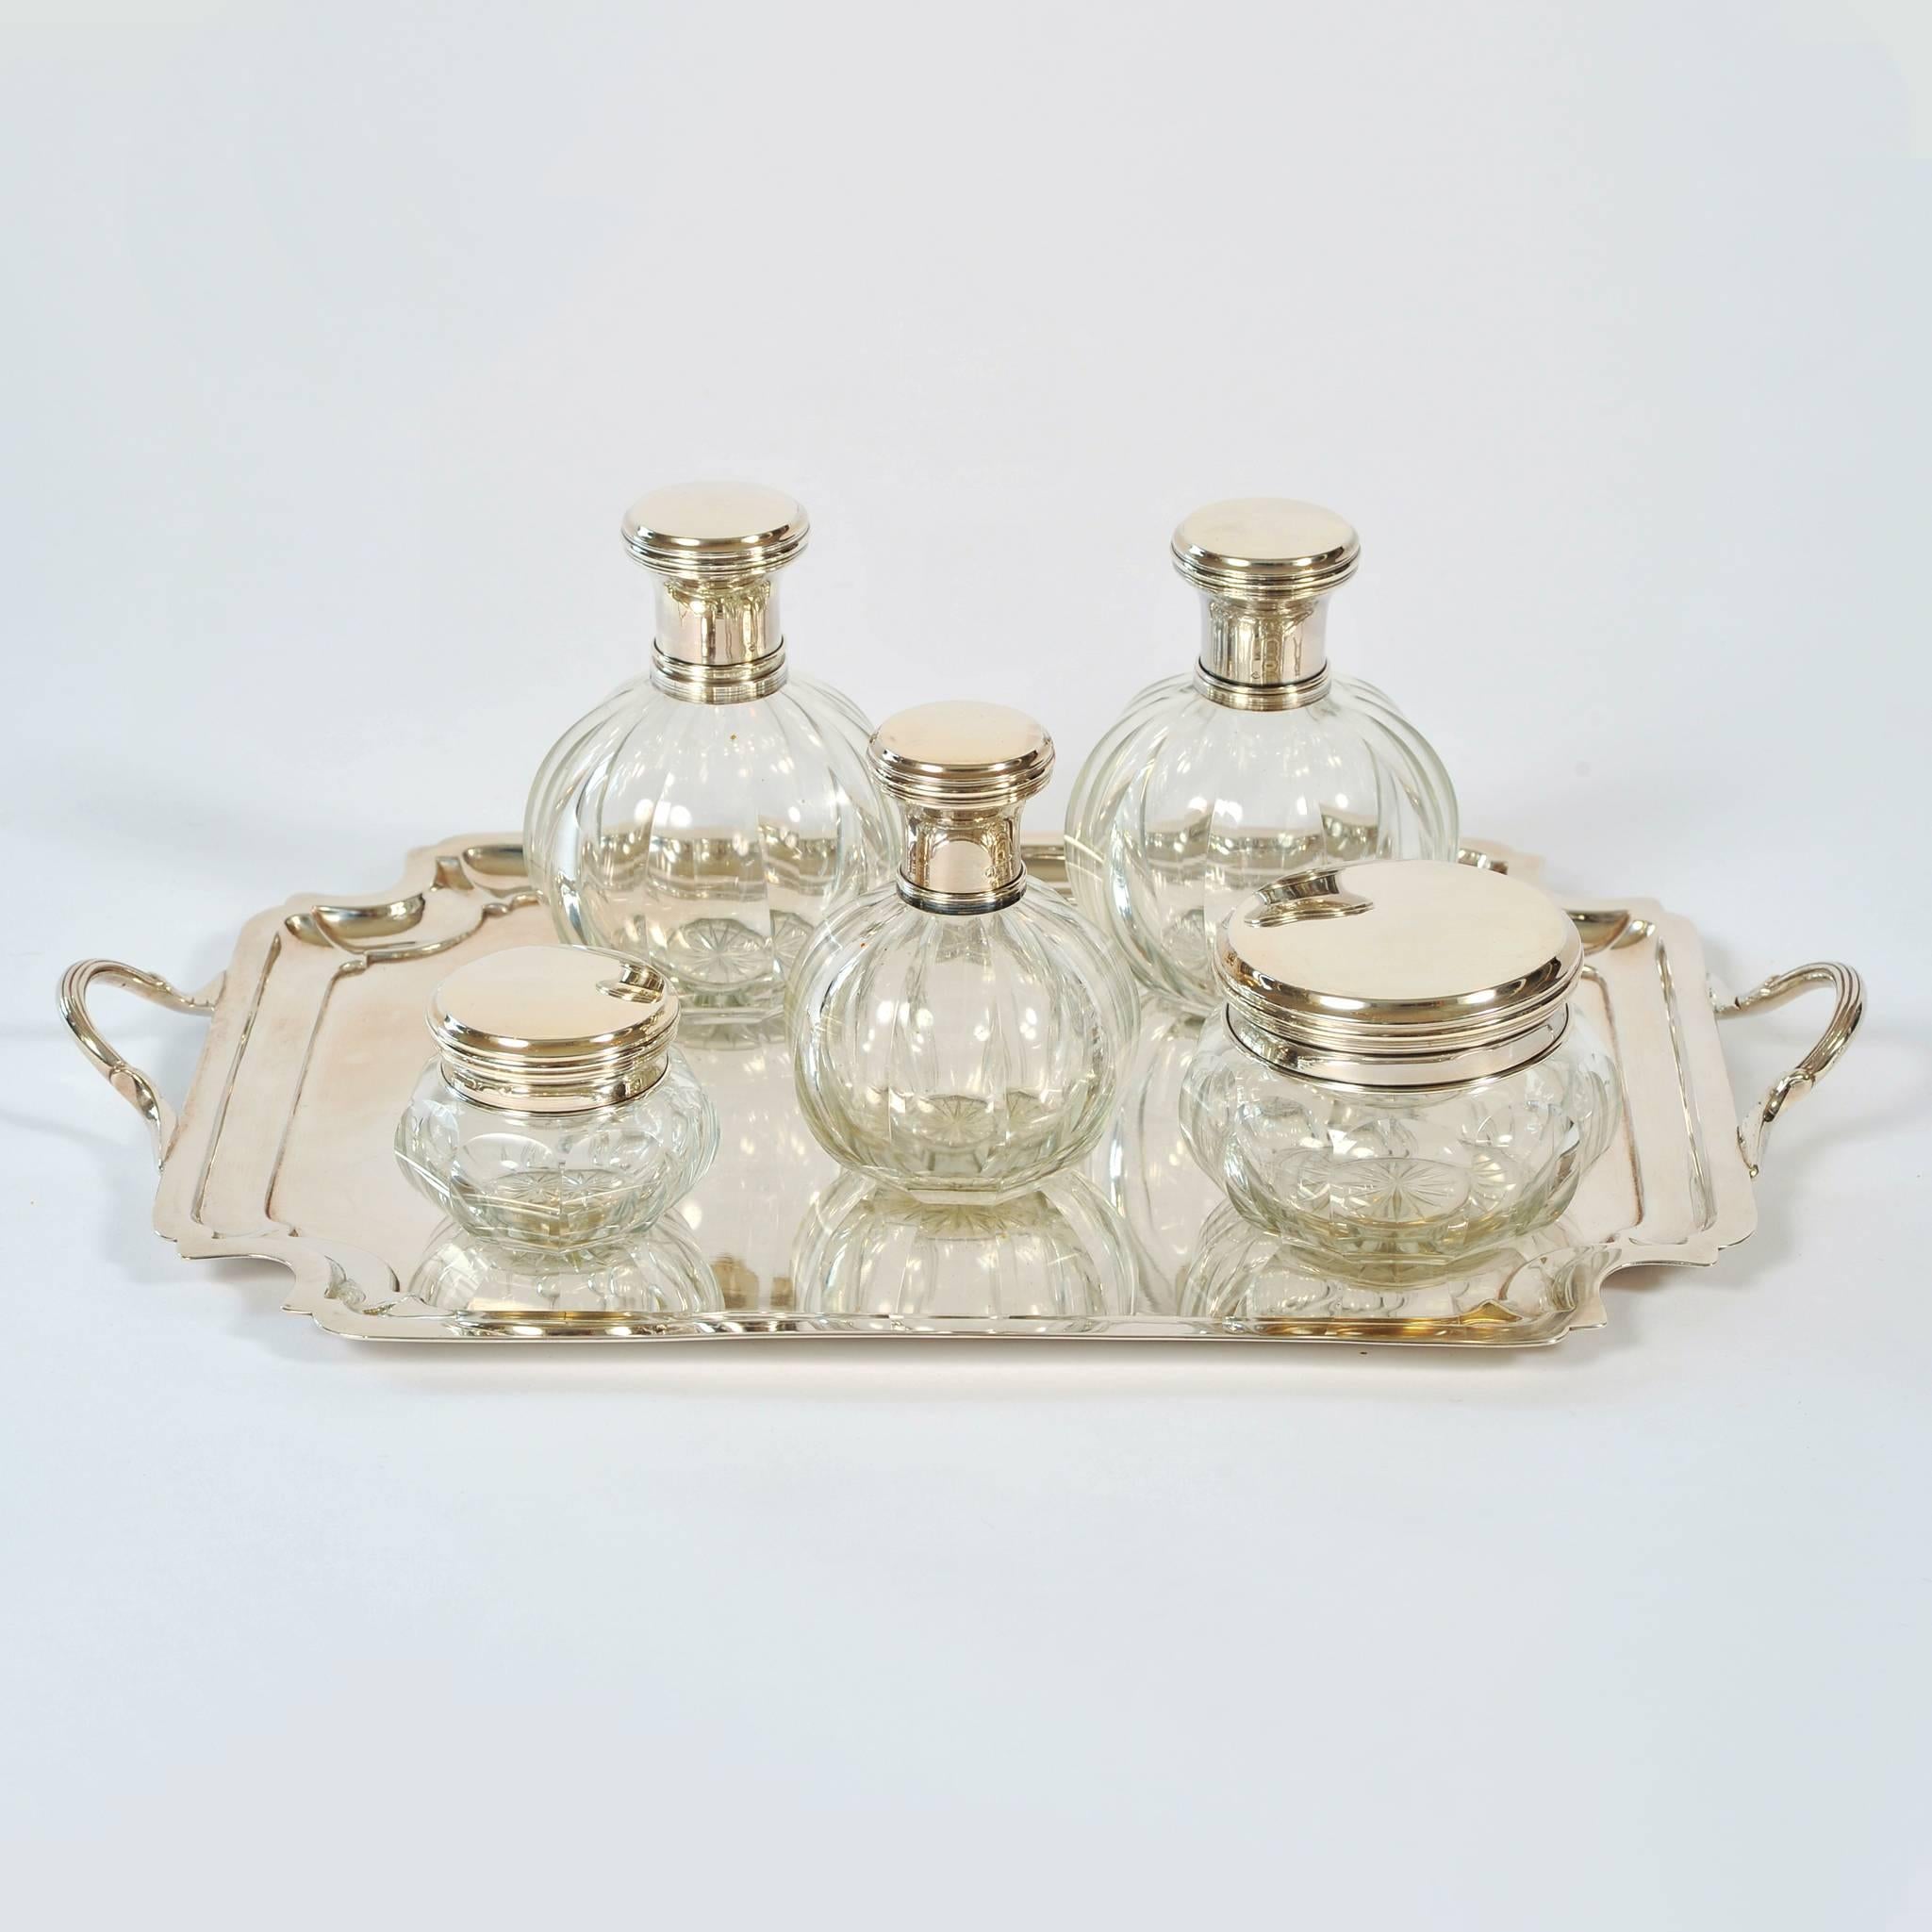 Five-piece set comprising of three scent bottles with their glass stoppers intact, one powder puff and one cold cream jar, all in cut-glass with turned silver tops
(Matching French rectangular silver tray, circa 1900, sold separately).

The